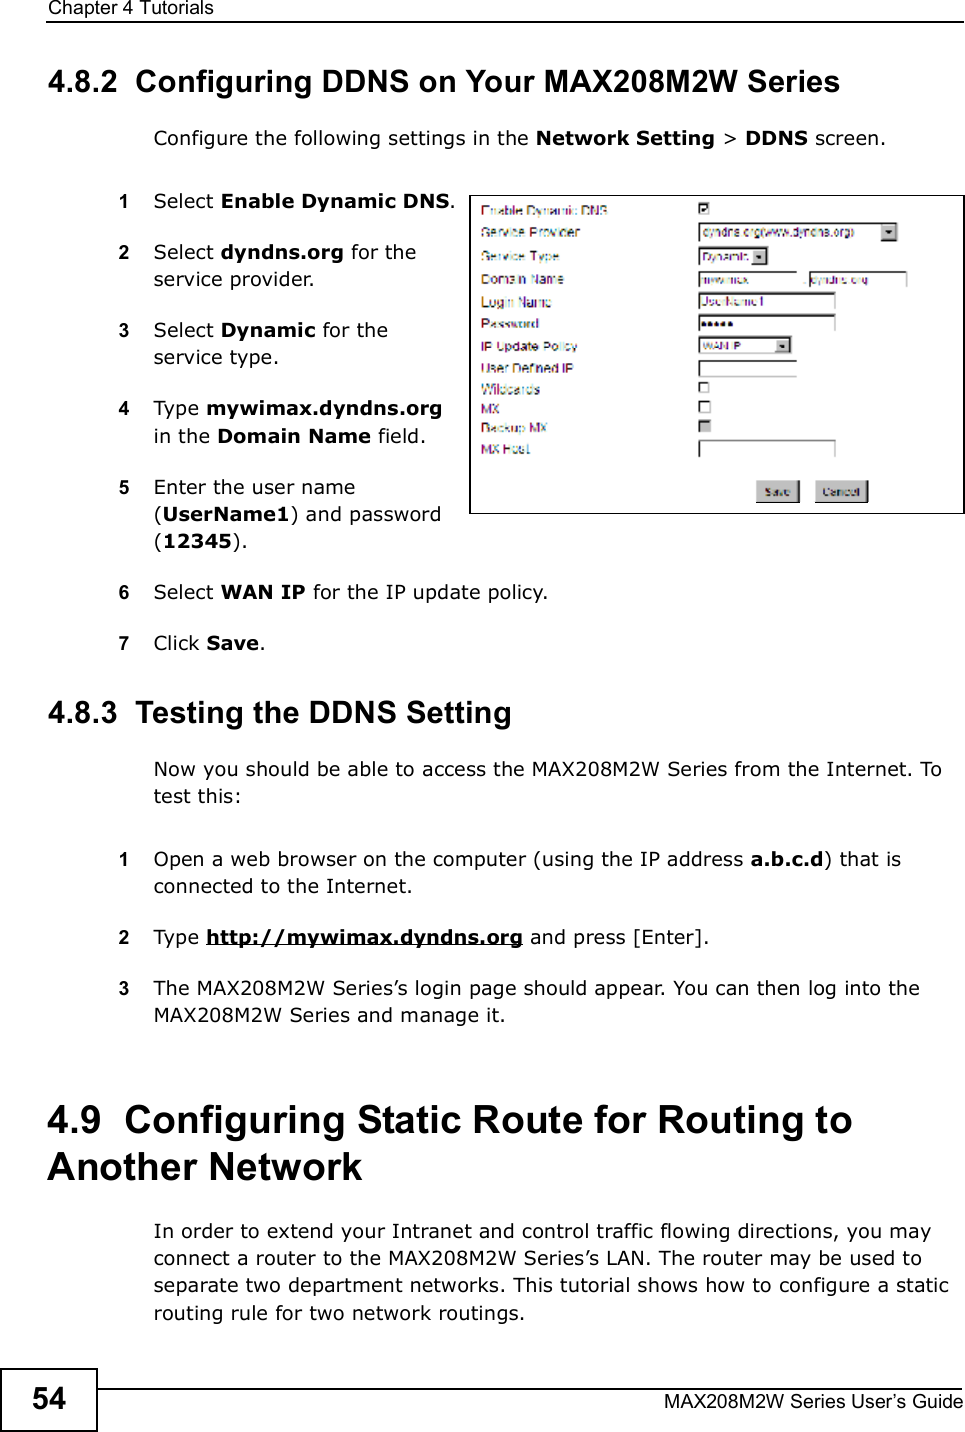 Chapter 4TutorialsMAX208M2W Series User s Guide544.8.2  Configuring DDNS on Your MAX208M2W SeriesConfigure the following settings in the Network Setting &gt; DDNS screen.1Select Enable Dynamic DNS.2Select dyndns.org for the service provider.3Select Dynamic for the service type.4Type mywimax.dyndns.org in the Domain Name field.5Enter the user name (UserName1) and password (12345).6Select WAN IP for the IP update policy.7Click Save.4.8.3  Testing the DDNS SettingNow you should be able to access the MAX208M2W Series from the Internet. To test this:1Open a web browser on the computer (using the IP address a.b.c.d) that is connected to the Internet.2Type http://mywimax.dyndns.org and press [Enter].3The MAX208M2W Series s login page should appear. You can then log into the MAX208M2W Series and manage it.4.9  Configuring Static Route for Routing to Another NetworkIn order to extend your Intranet and control traffic flowing directions, you may connect a router to the MAX208M2W Series s LAN. The router may be used to separate two department networks. This tutorial shows how to configure a static routing rule for two network routings.